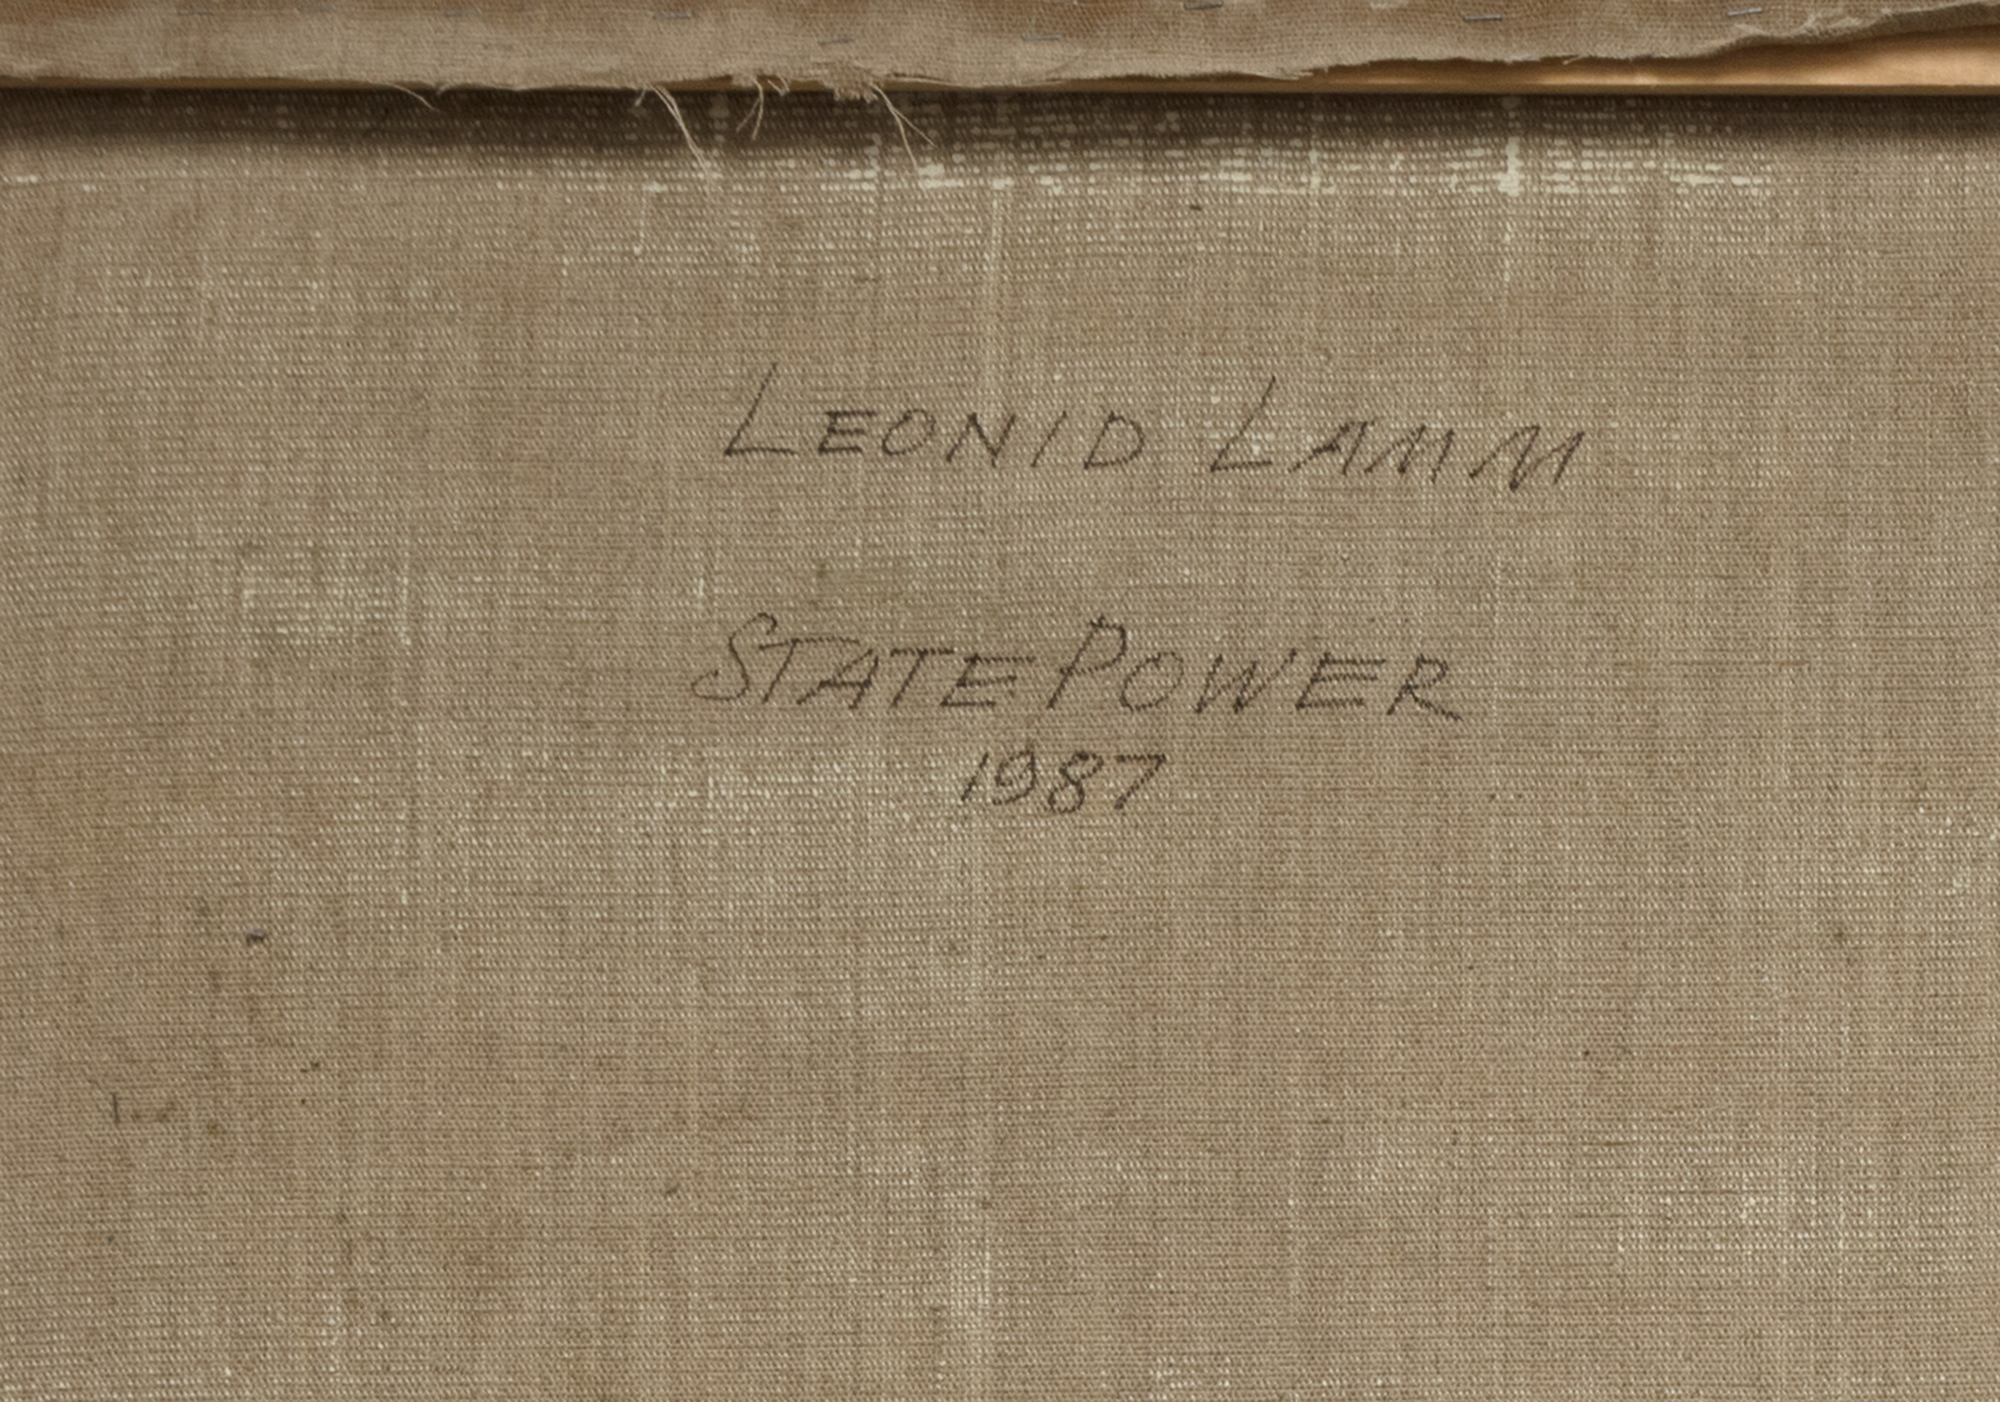 LEONID LAMM - State Power - oil on canvas - 68 3/8 x 66 x 1 in.